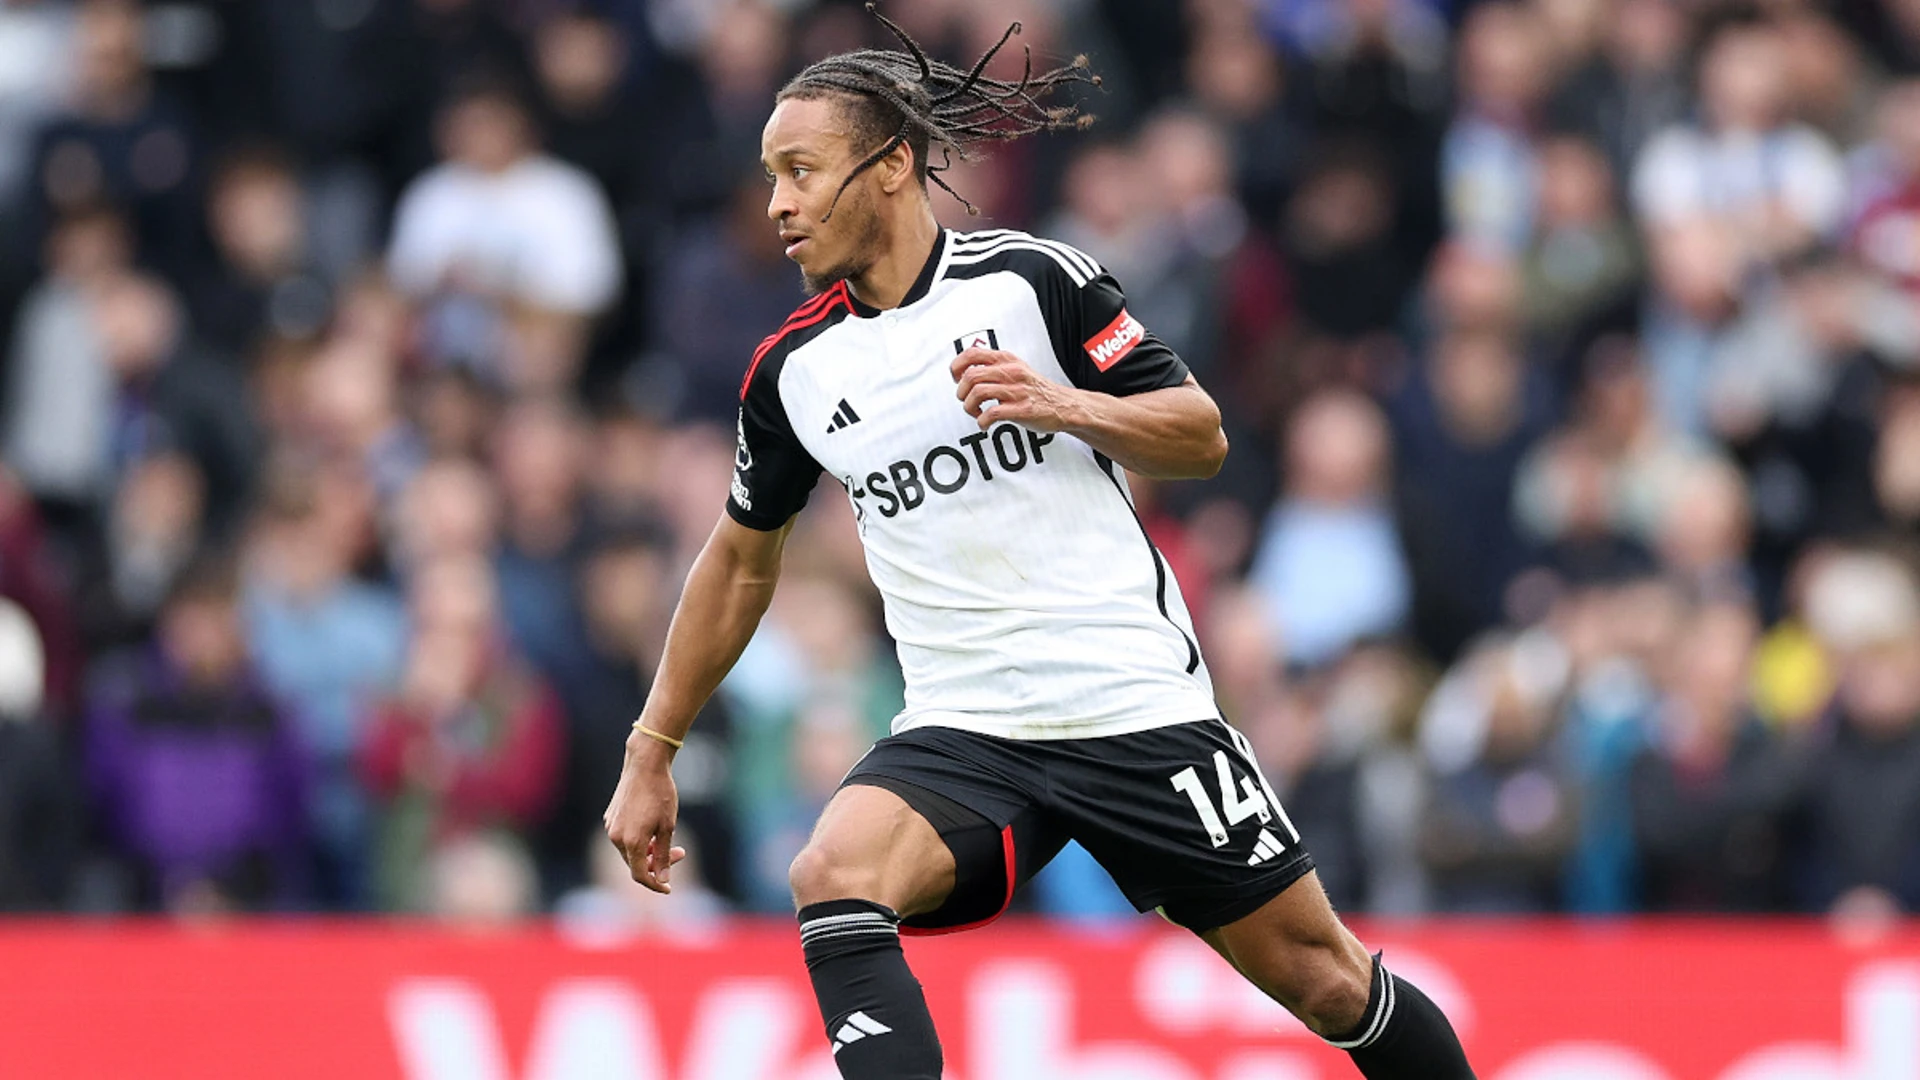 Leicester sign De Cordova-Reid from Fulham on free transfer